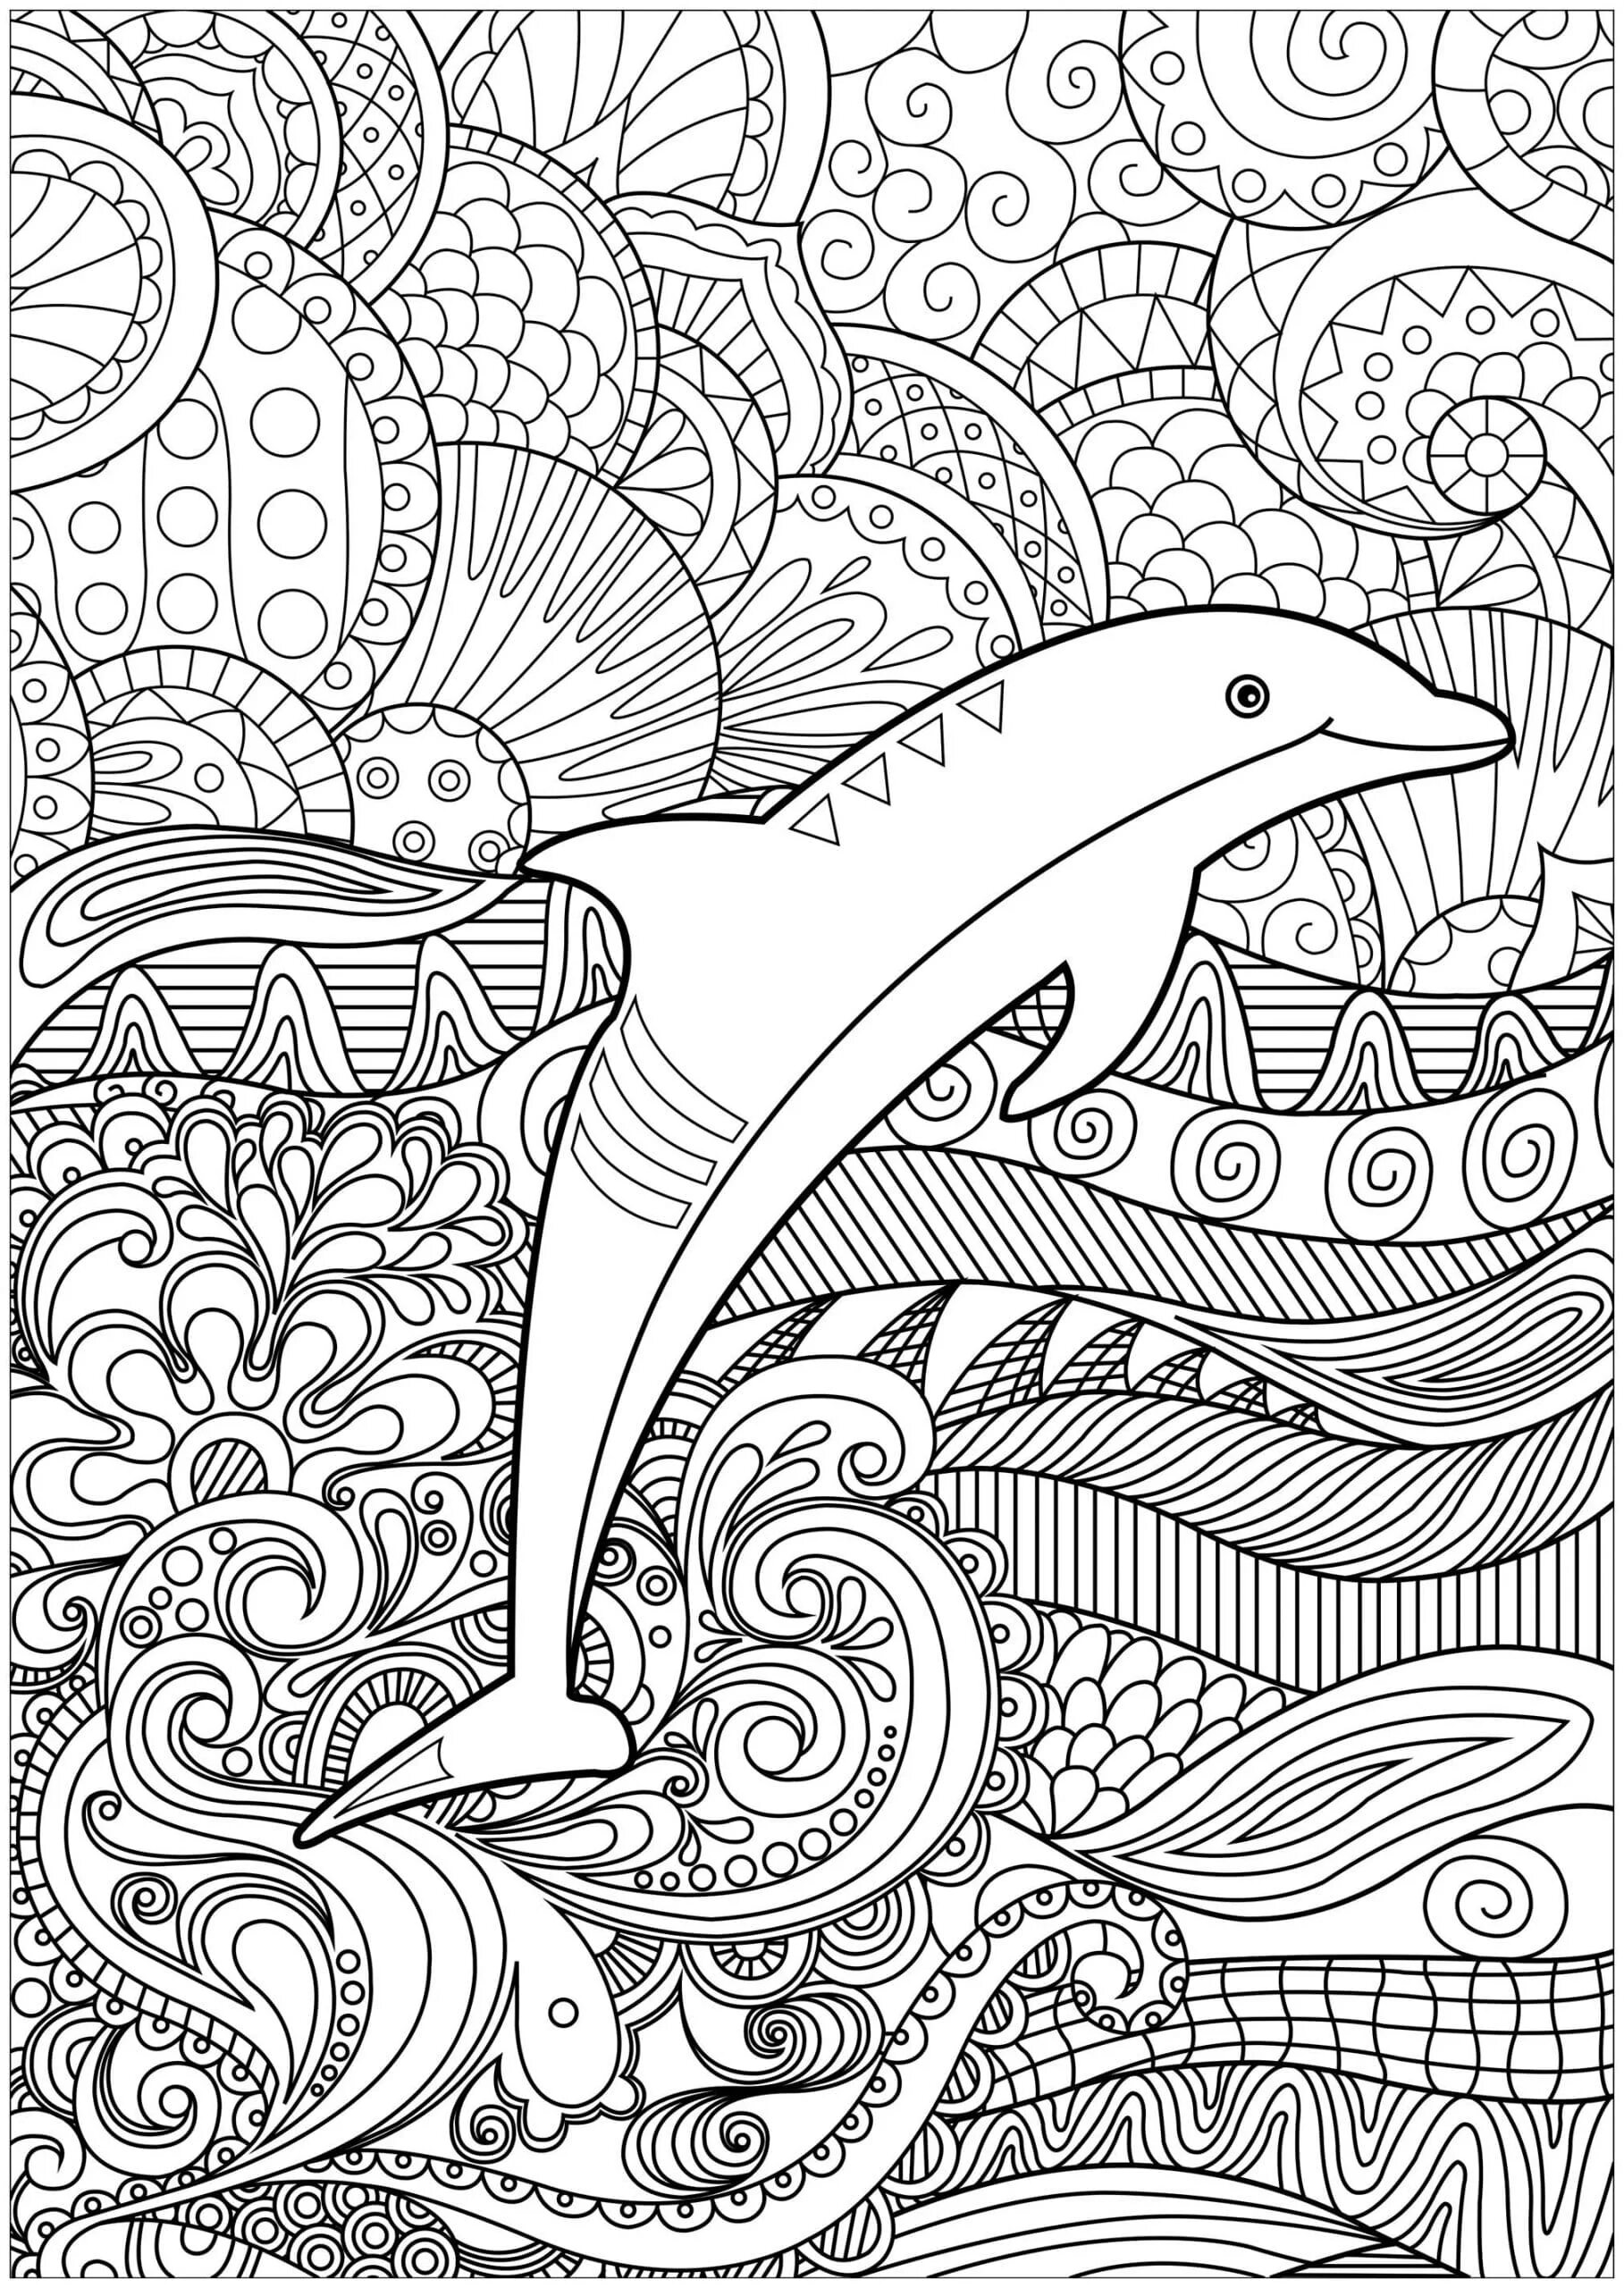 Creative relaxation coloring book for kids